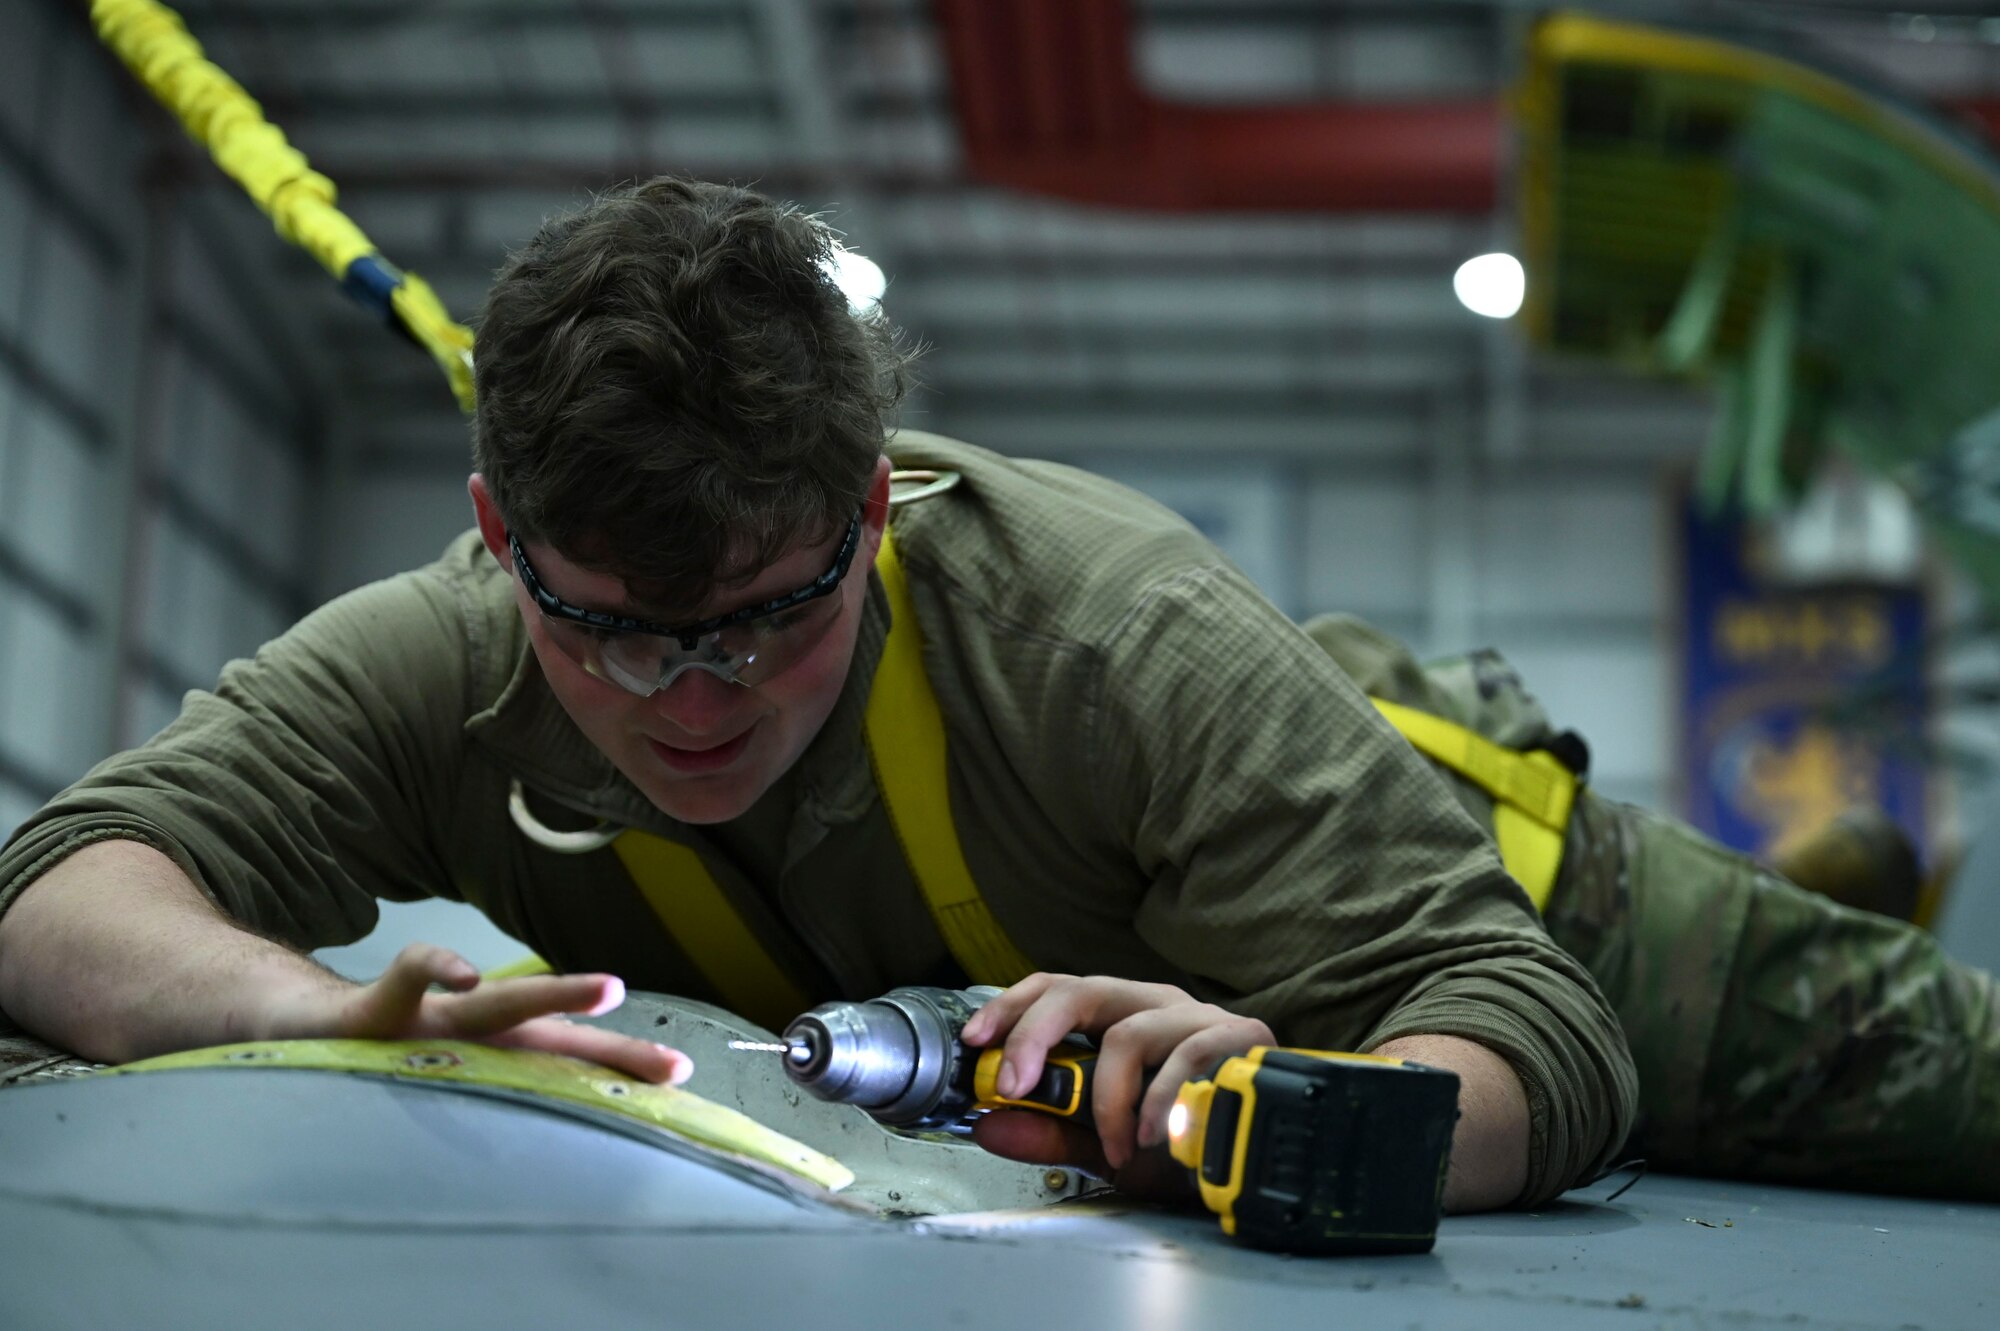 The 100th Maintenance Squadron aircraft structural maintenance shop, also known as sheet metal, preserves and extends the life of components for all RAF Mildenhall airframes.